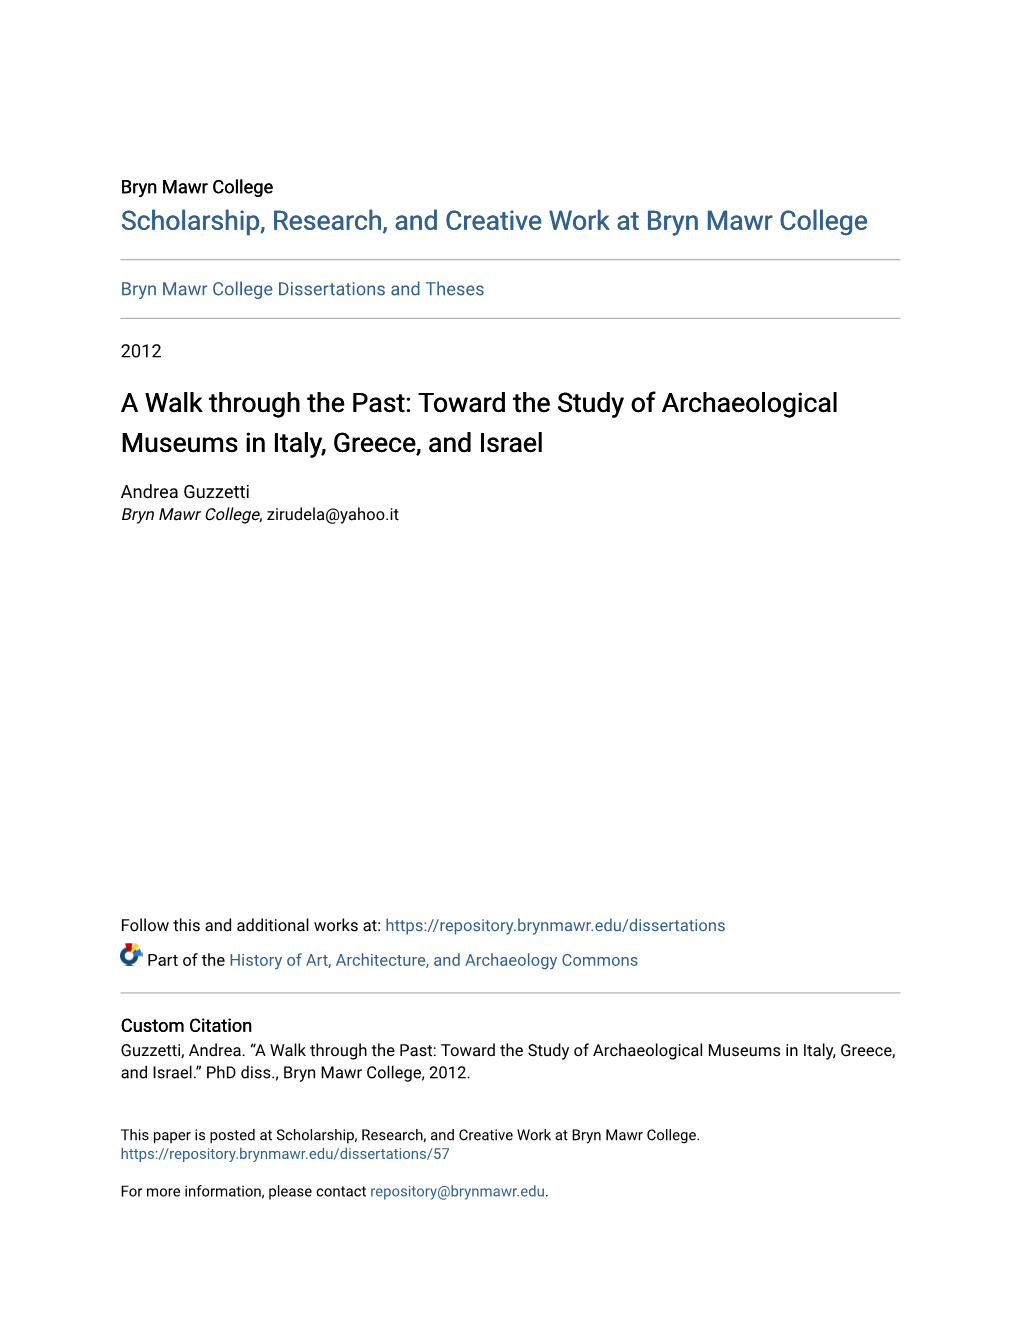 Toward the Study of Archaeological Museums in Italy, Greece, and Israel